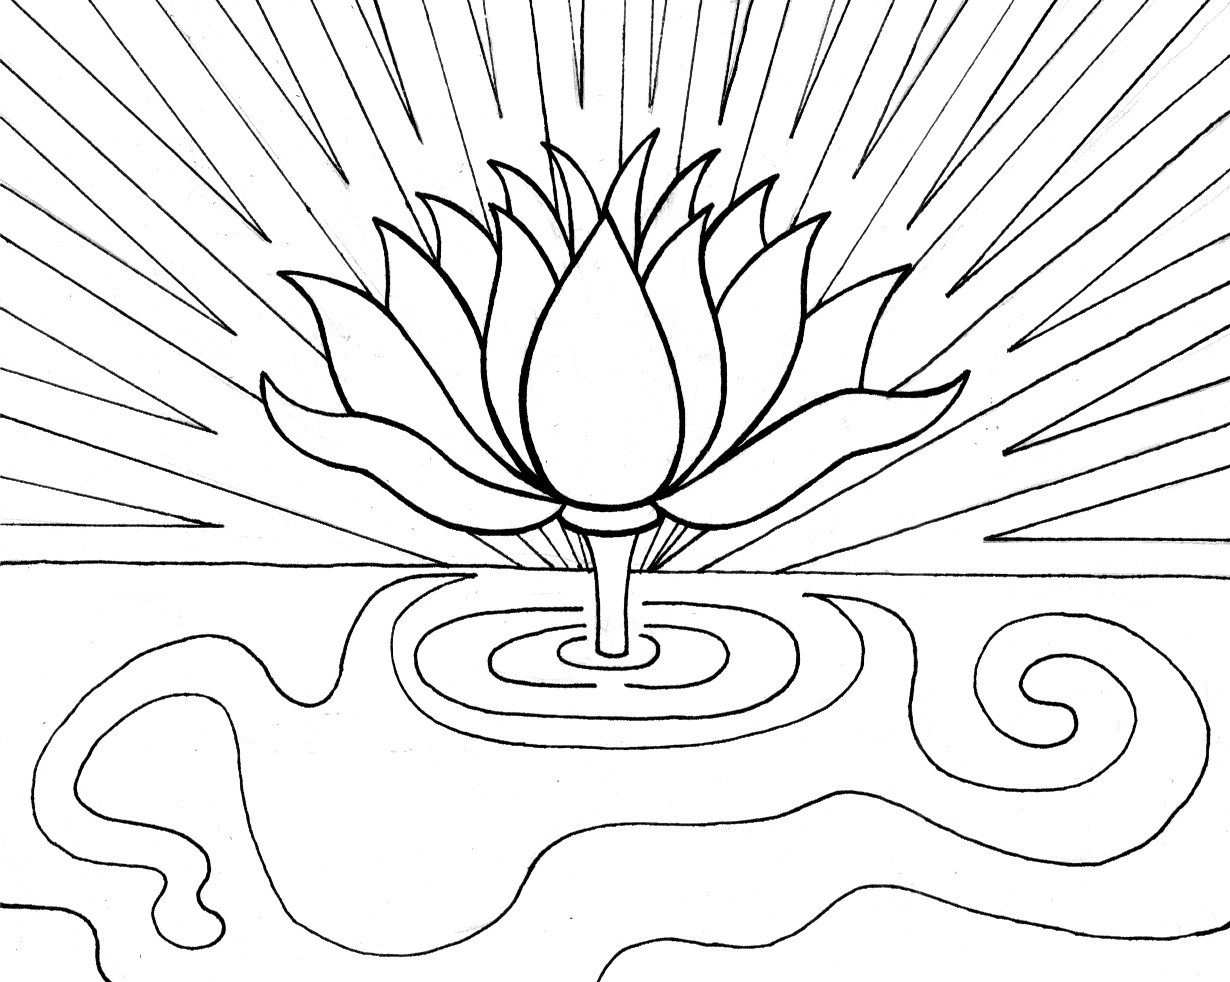 Lotus Coloring Pages
 Free Printable Lotus Coloring Pages For Kids